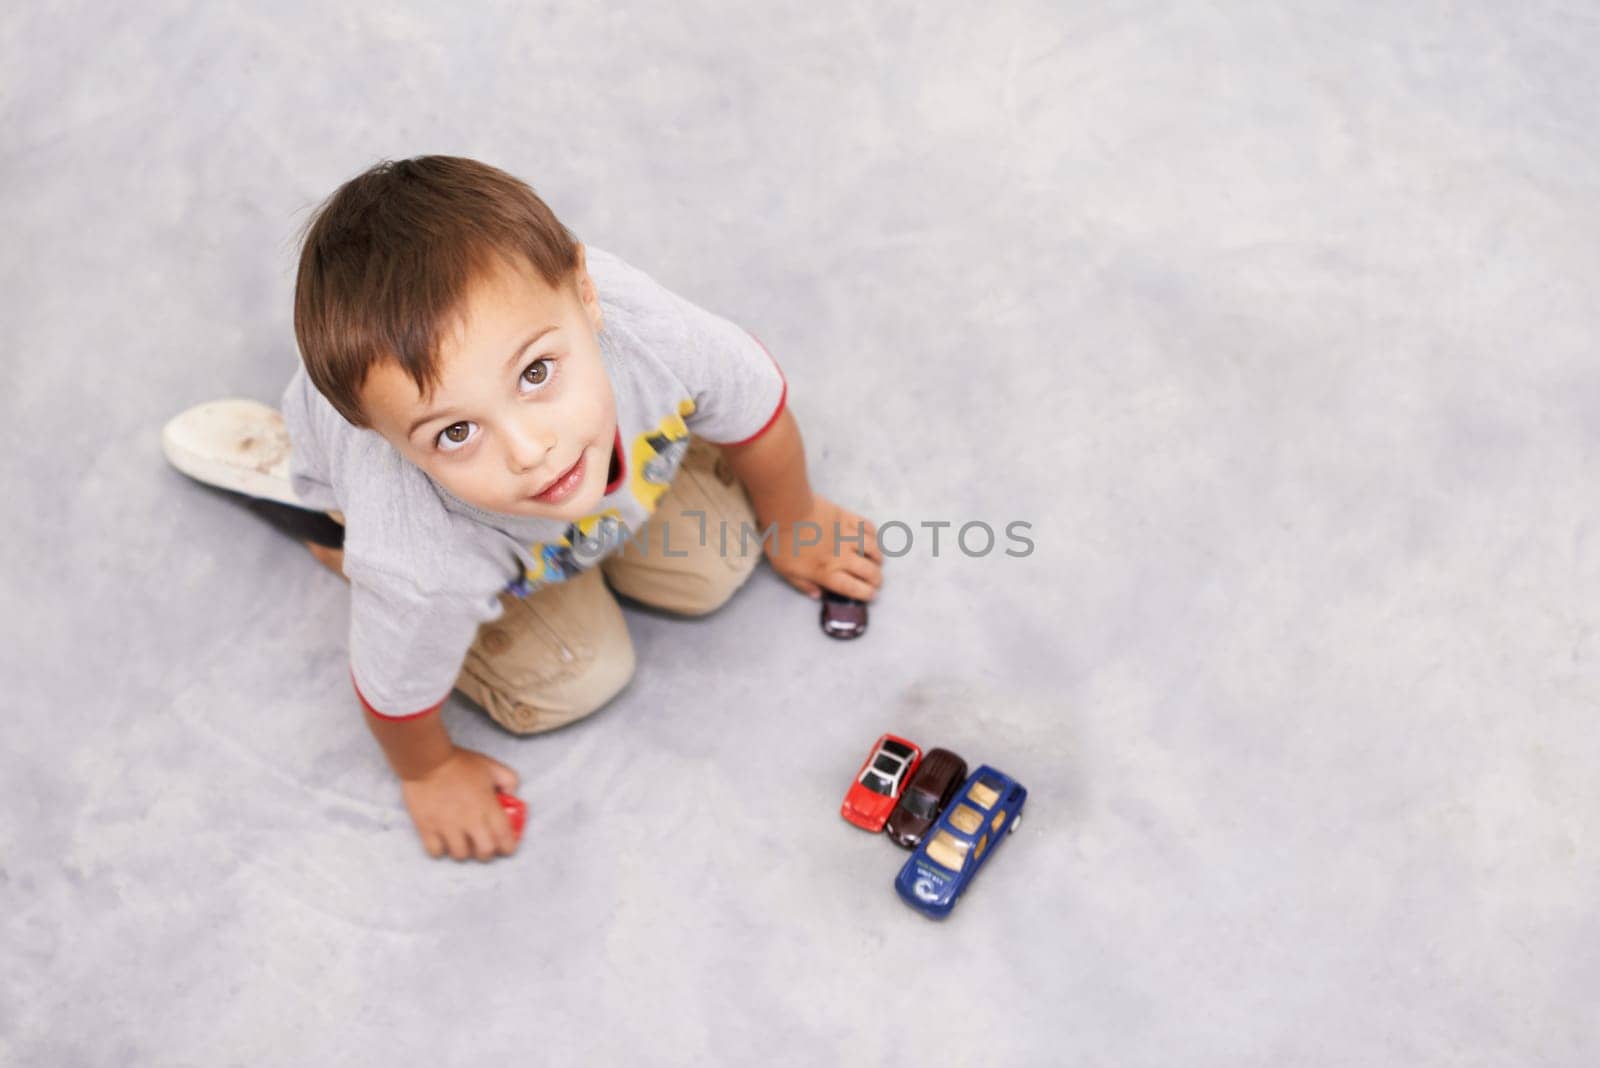 Car, toys and portrait of kid playing for learning, development and fun at modern home. Cute, top view and sweet young boy child enjoying game with vehicles on floor for childhood hobby at house. by YuriArcurs